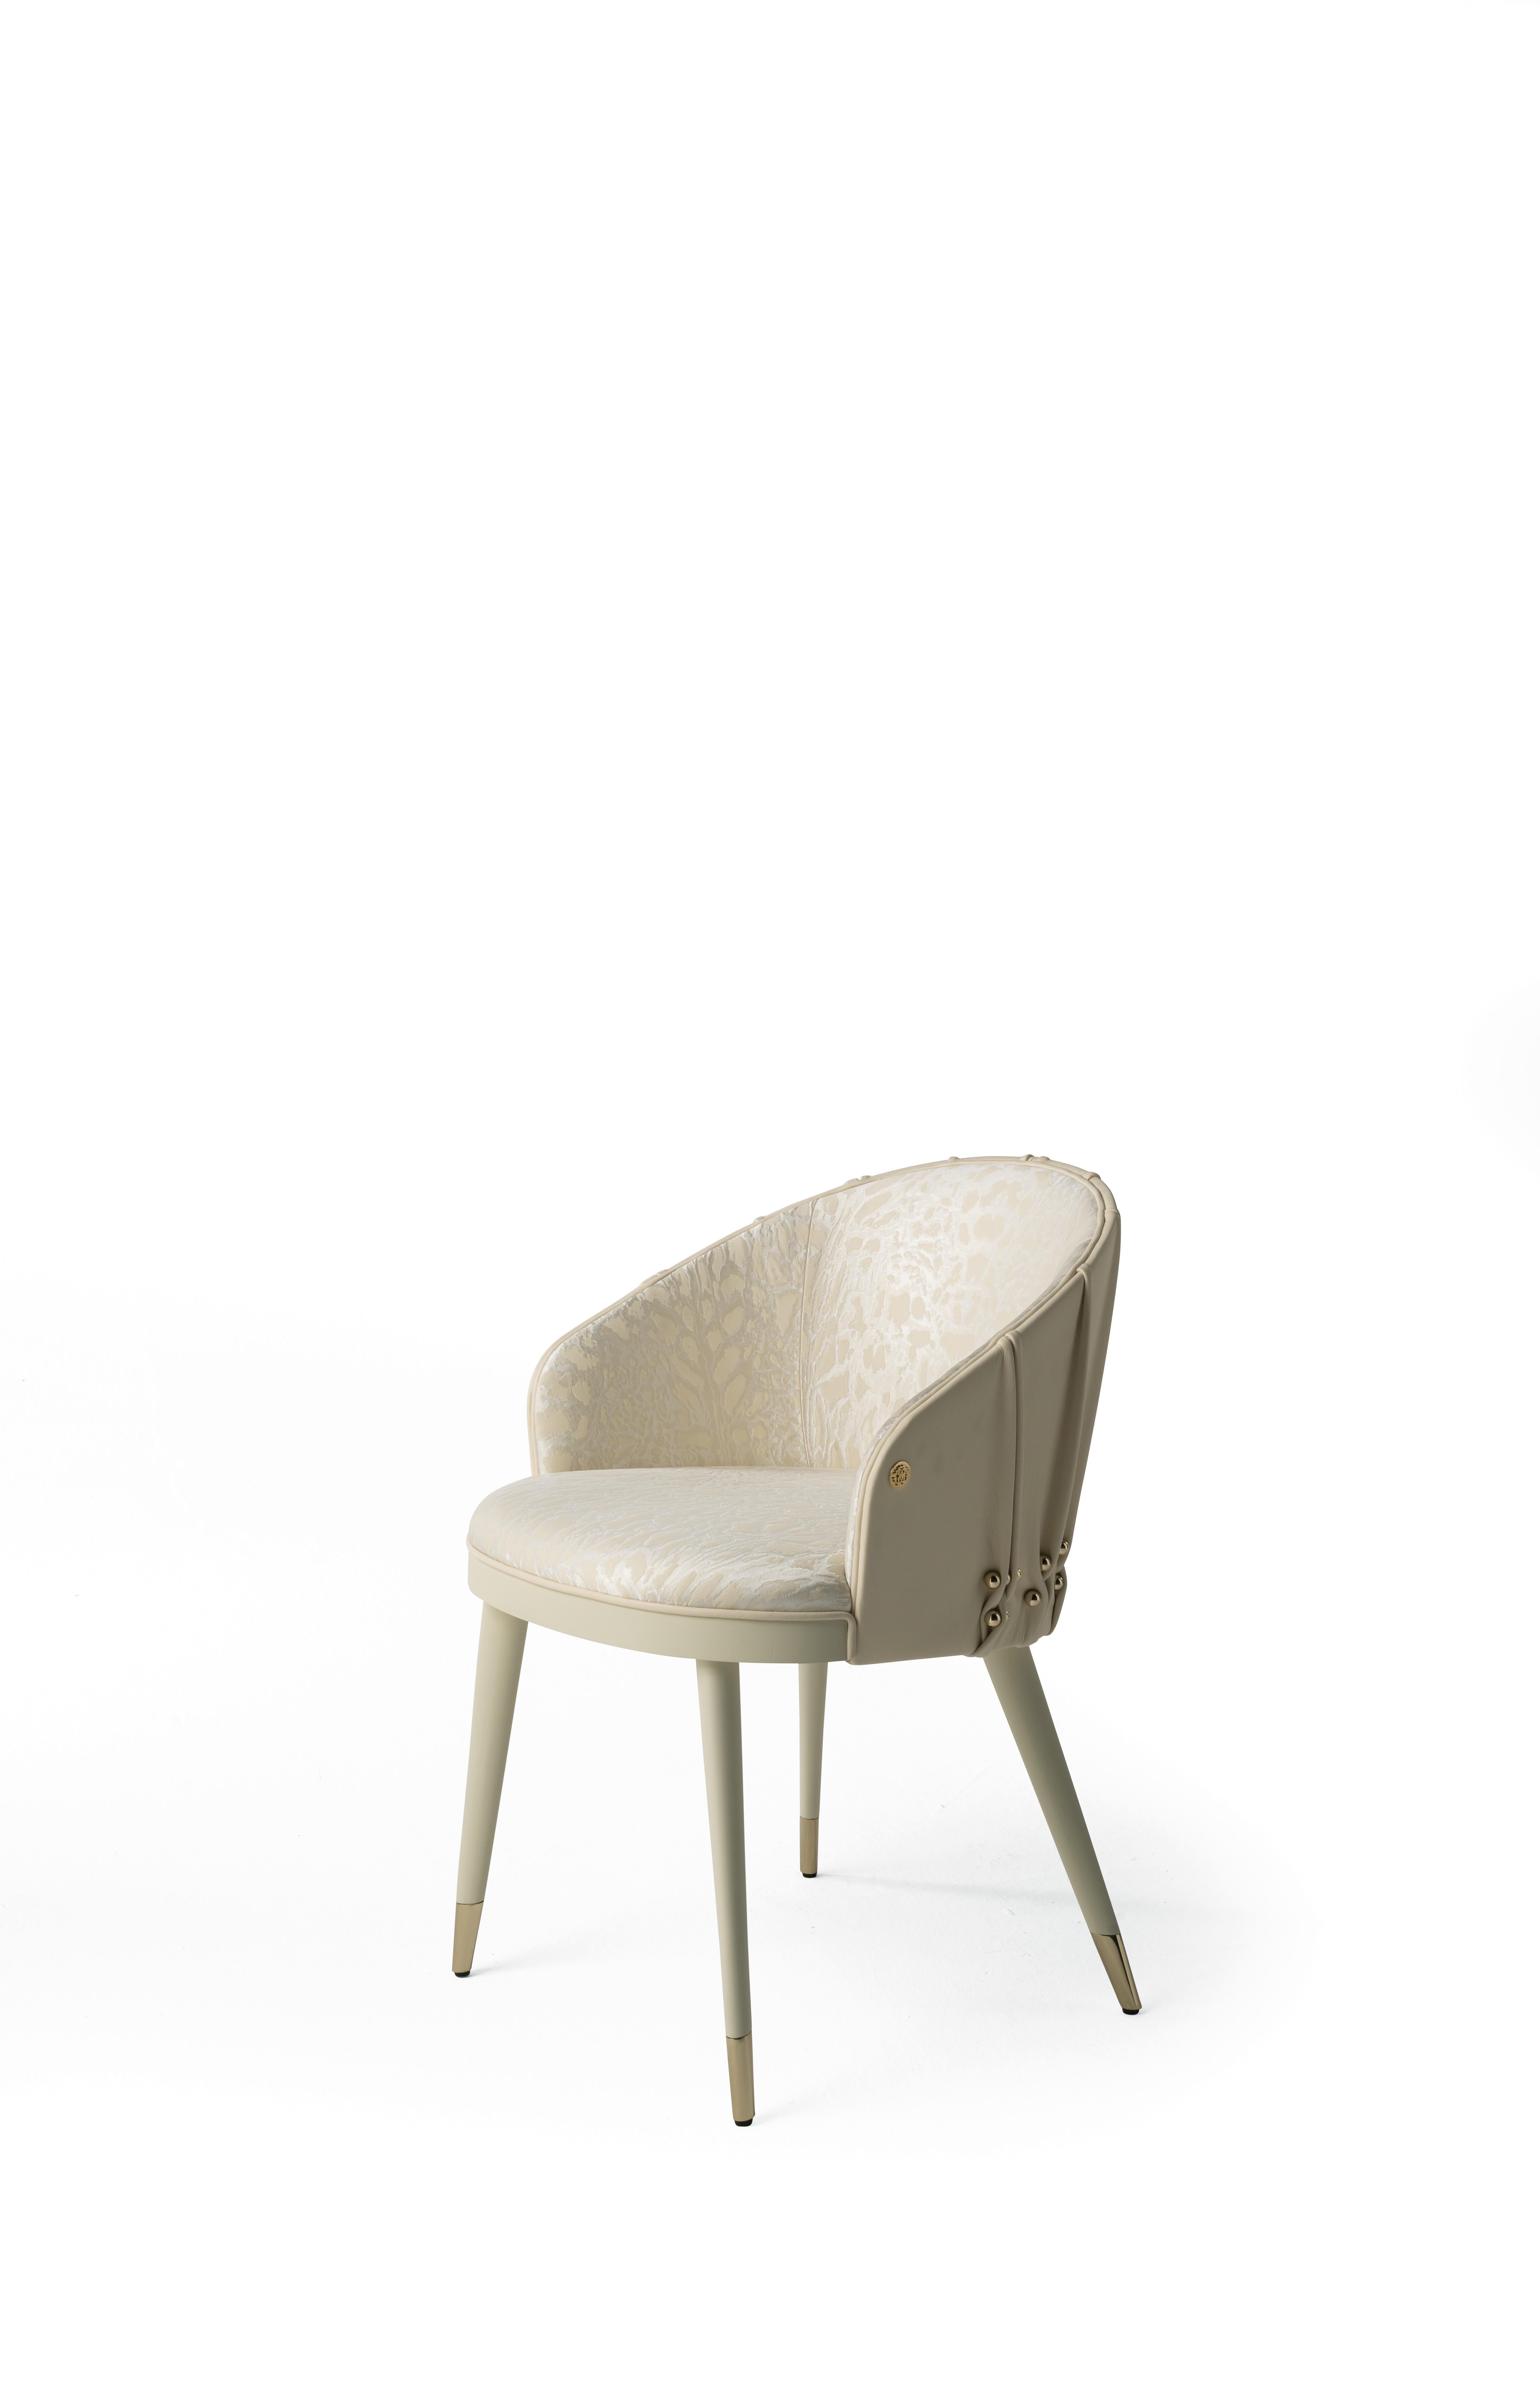 A comfortable chair with an exclusive design, characterized by leather upholstery and special pleating with metal piercings that recalls the bags and accessories of the Maison.
Inanda chair with structure in multilayer poplar wood. External